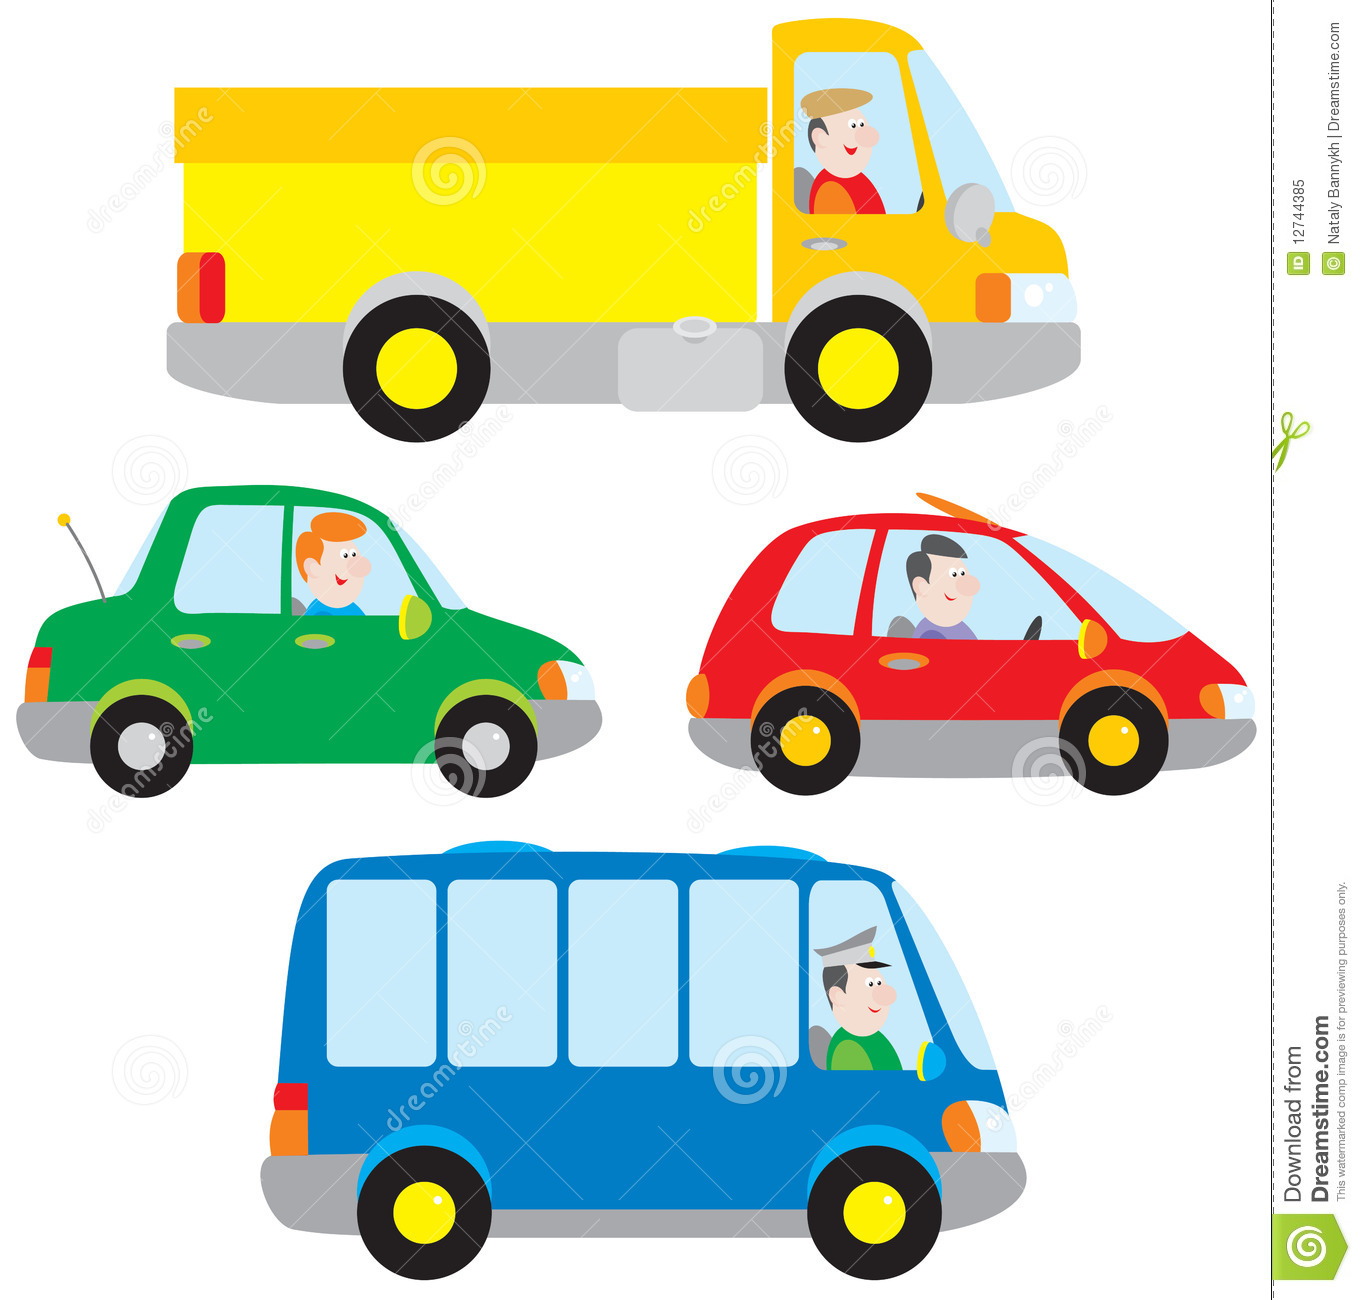 free clipart images vehicles - photo #28